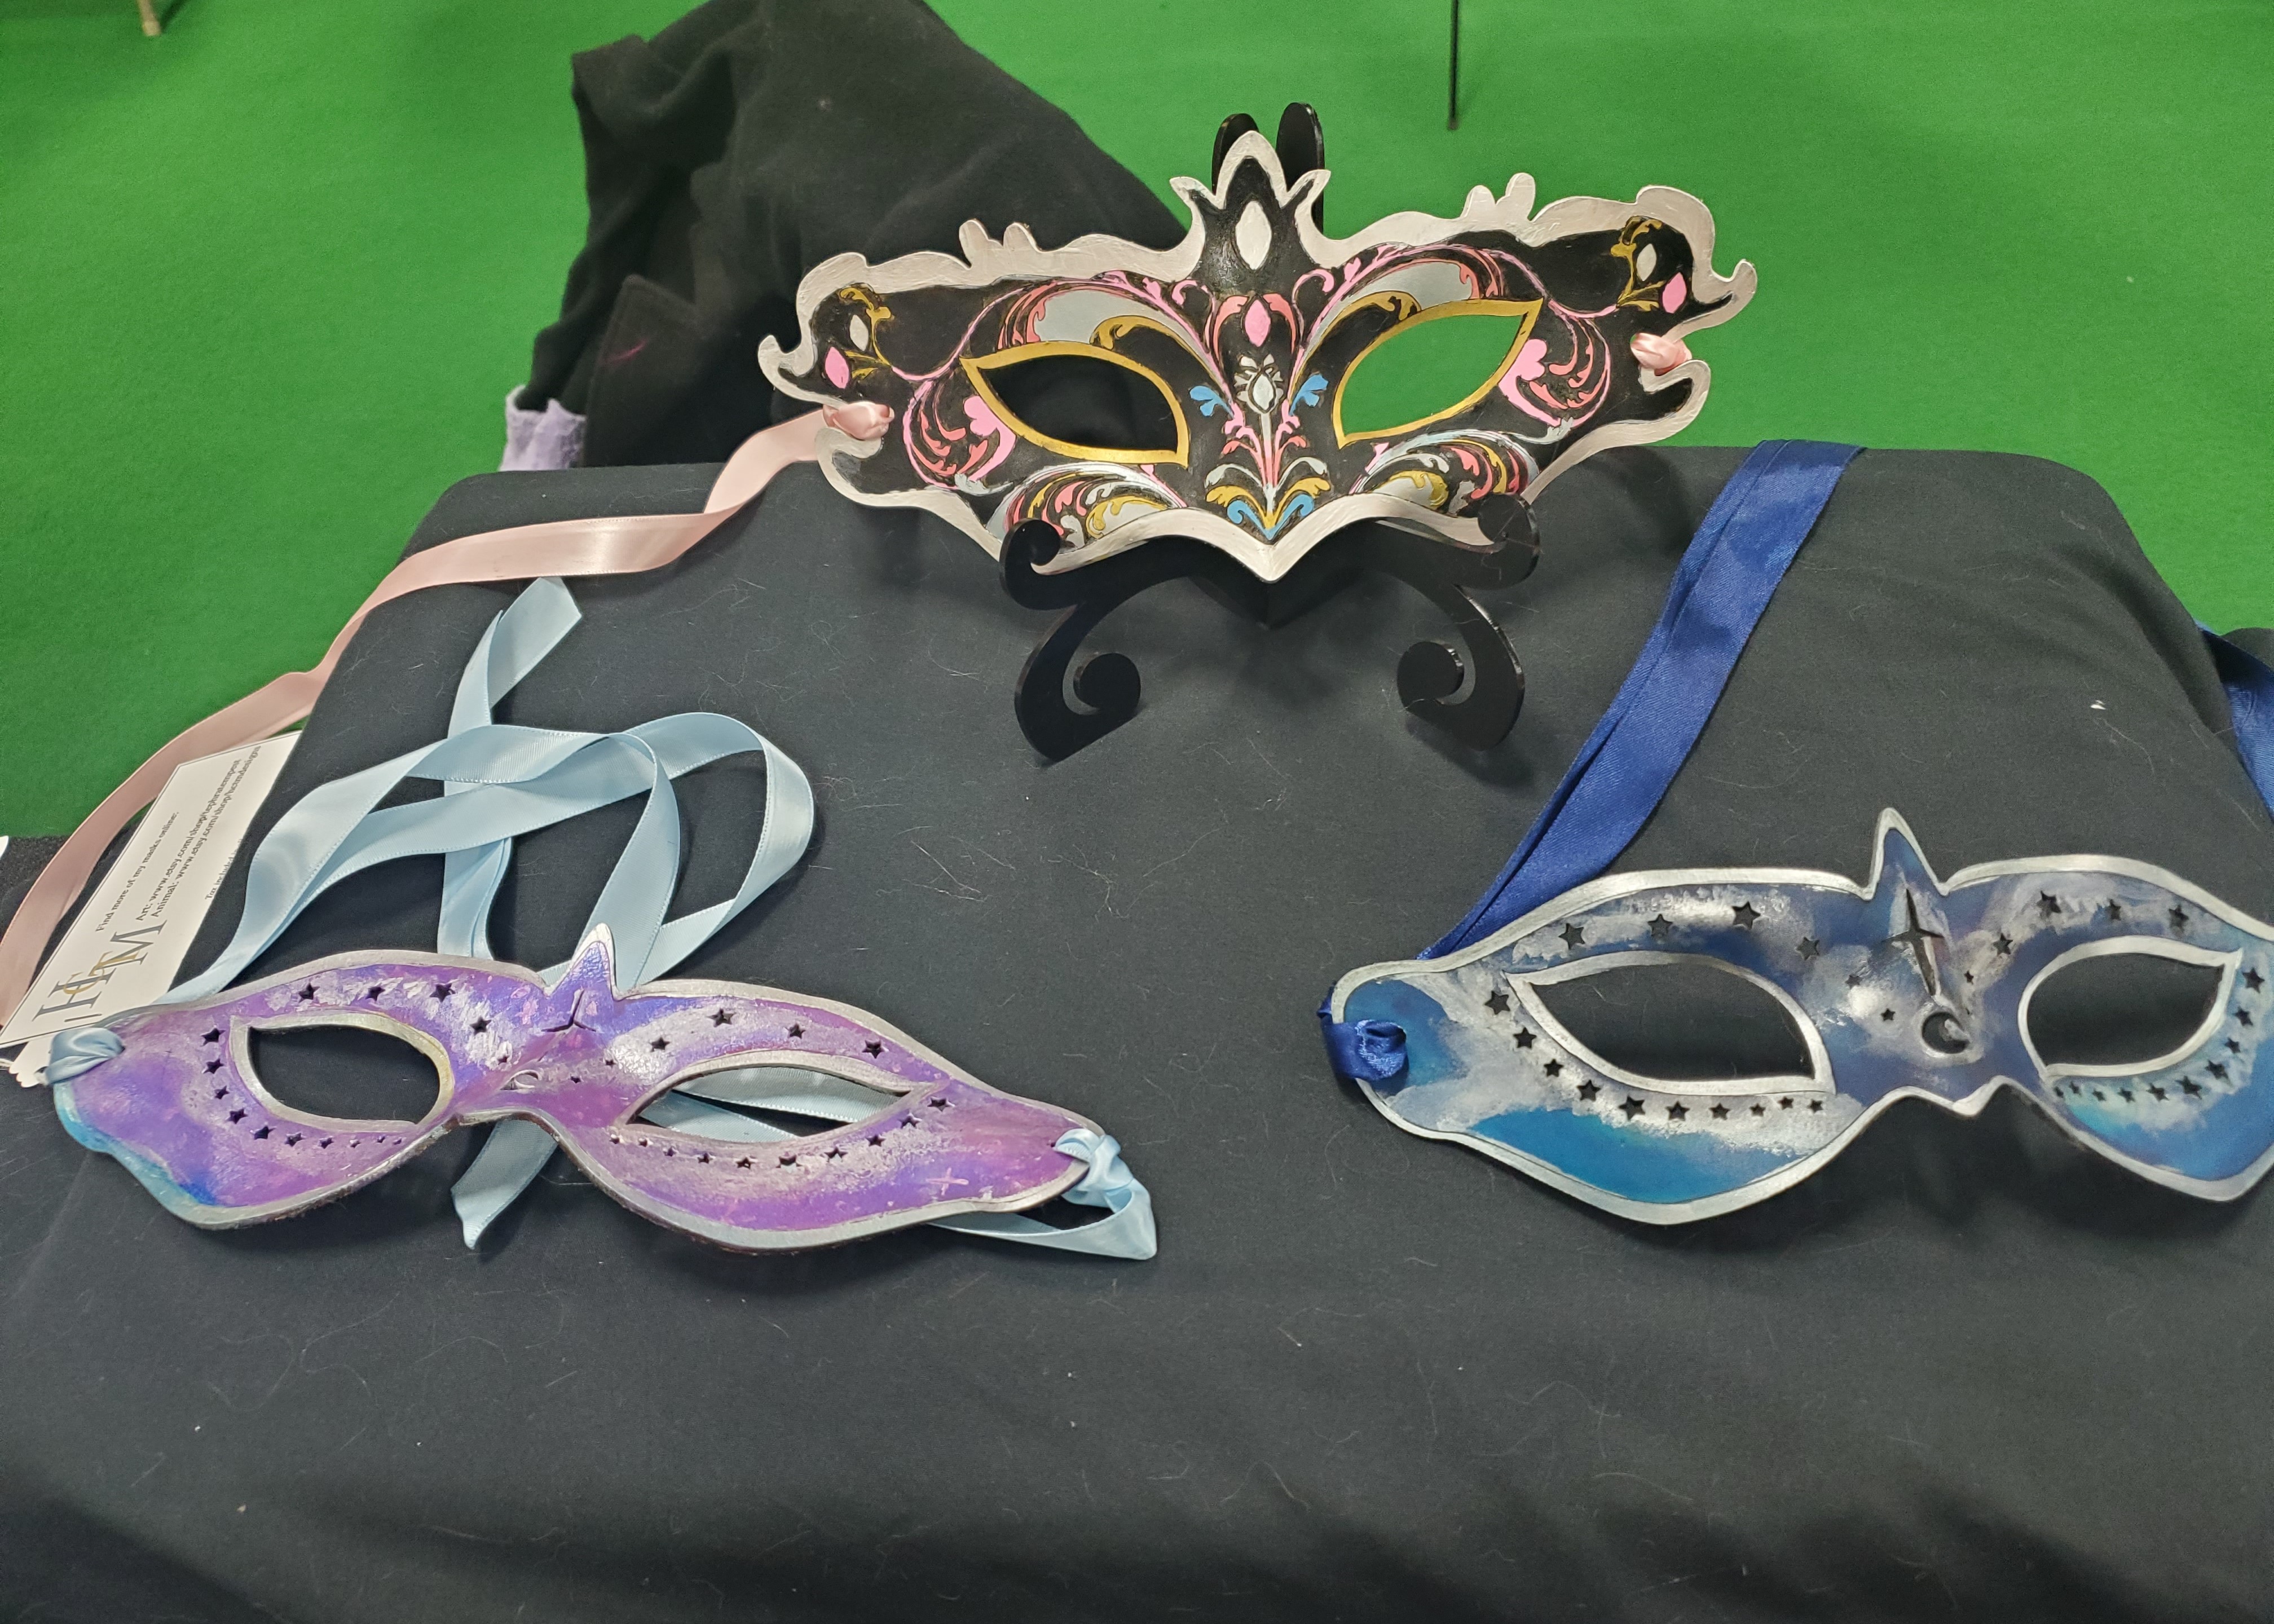 Picture of Leather Masquerade masks on a table display.